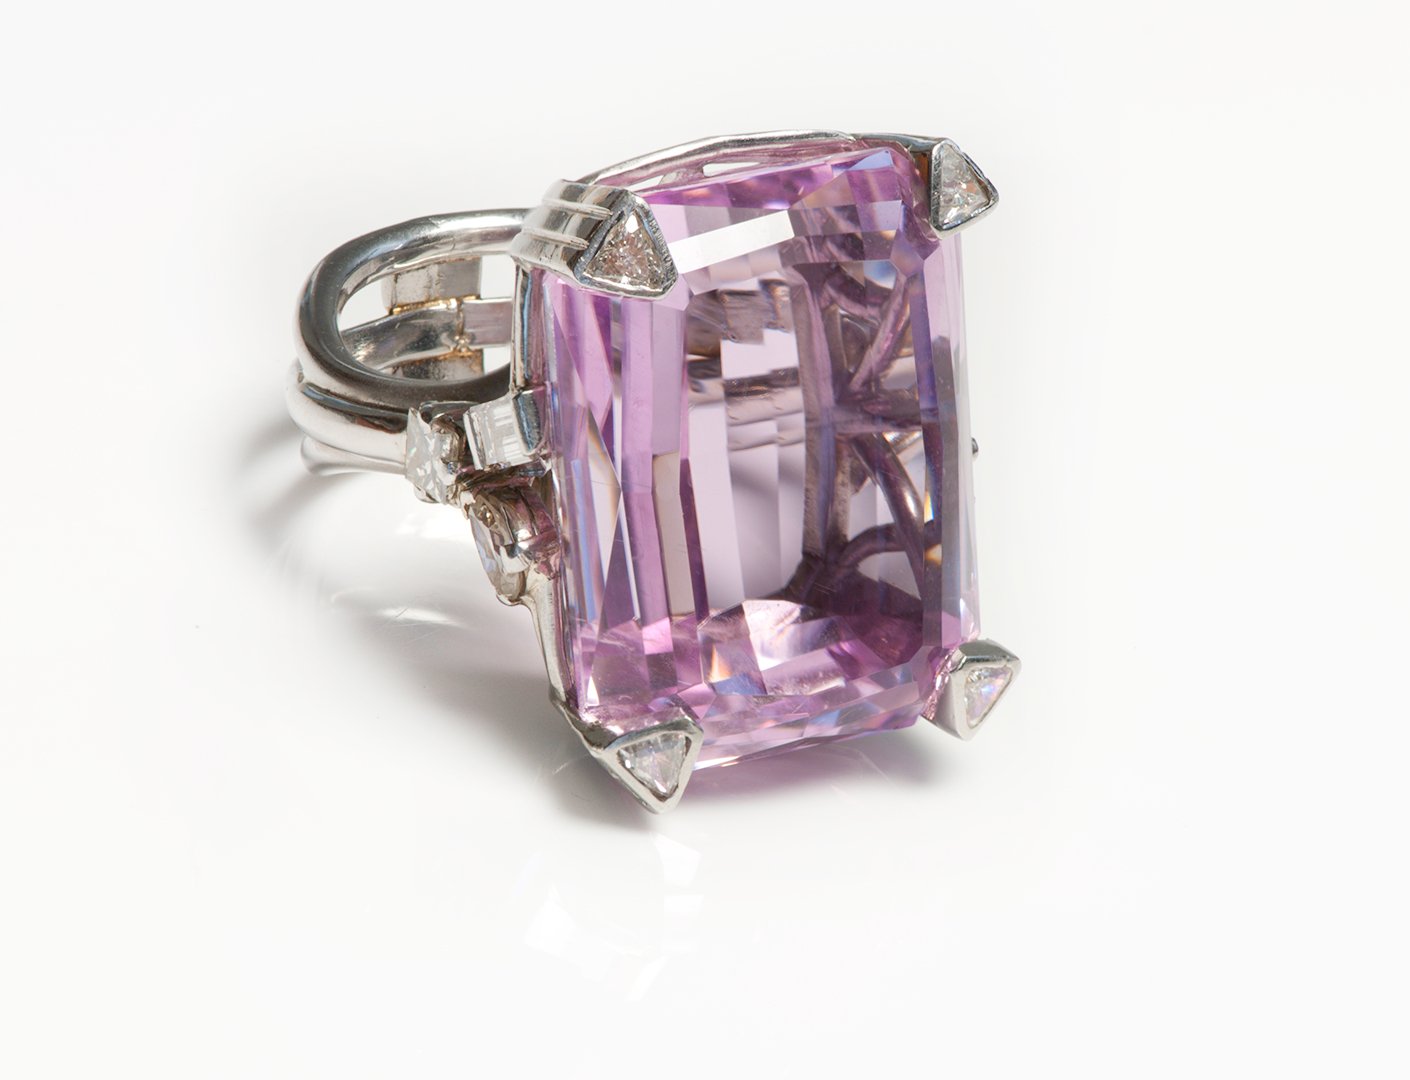 Discover Kunzite - The Beautiful Pink "Gemstone Of The Evening" - DSF Antique Jewelry